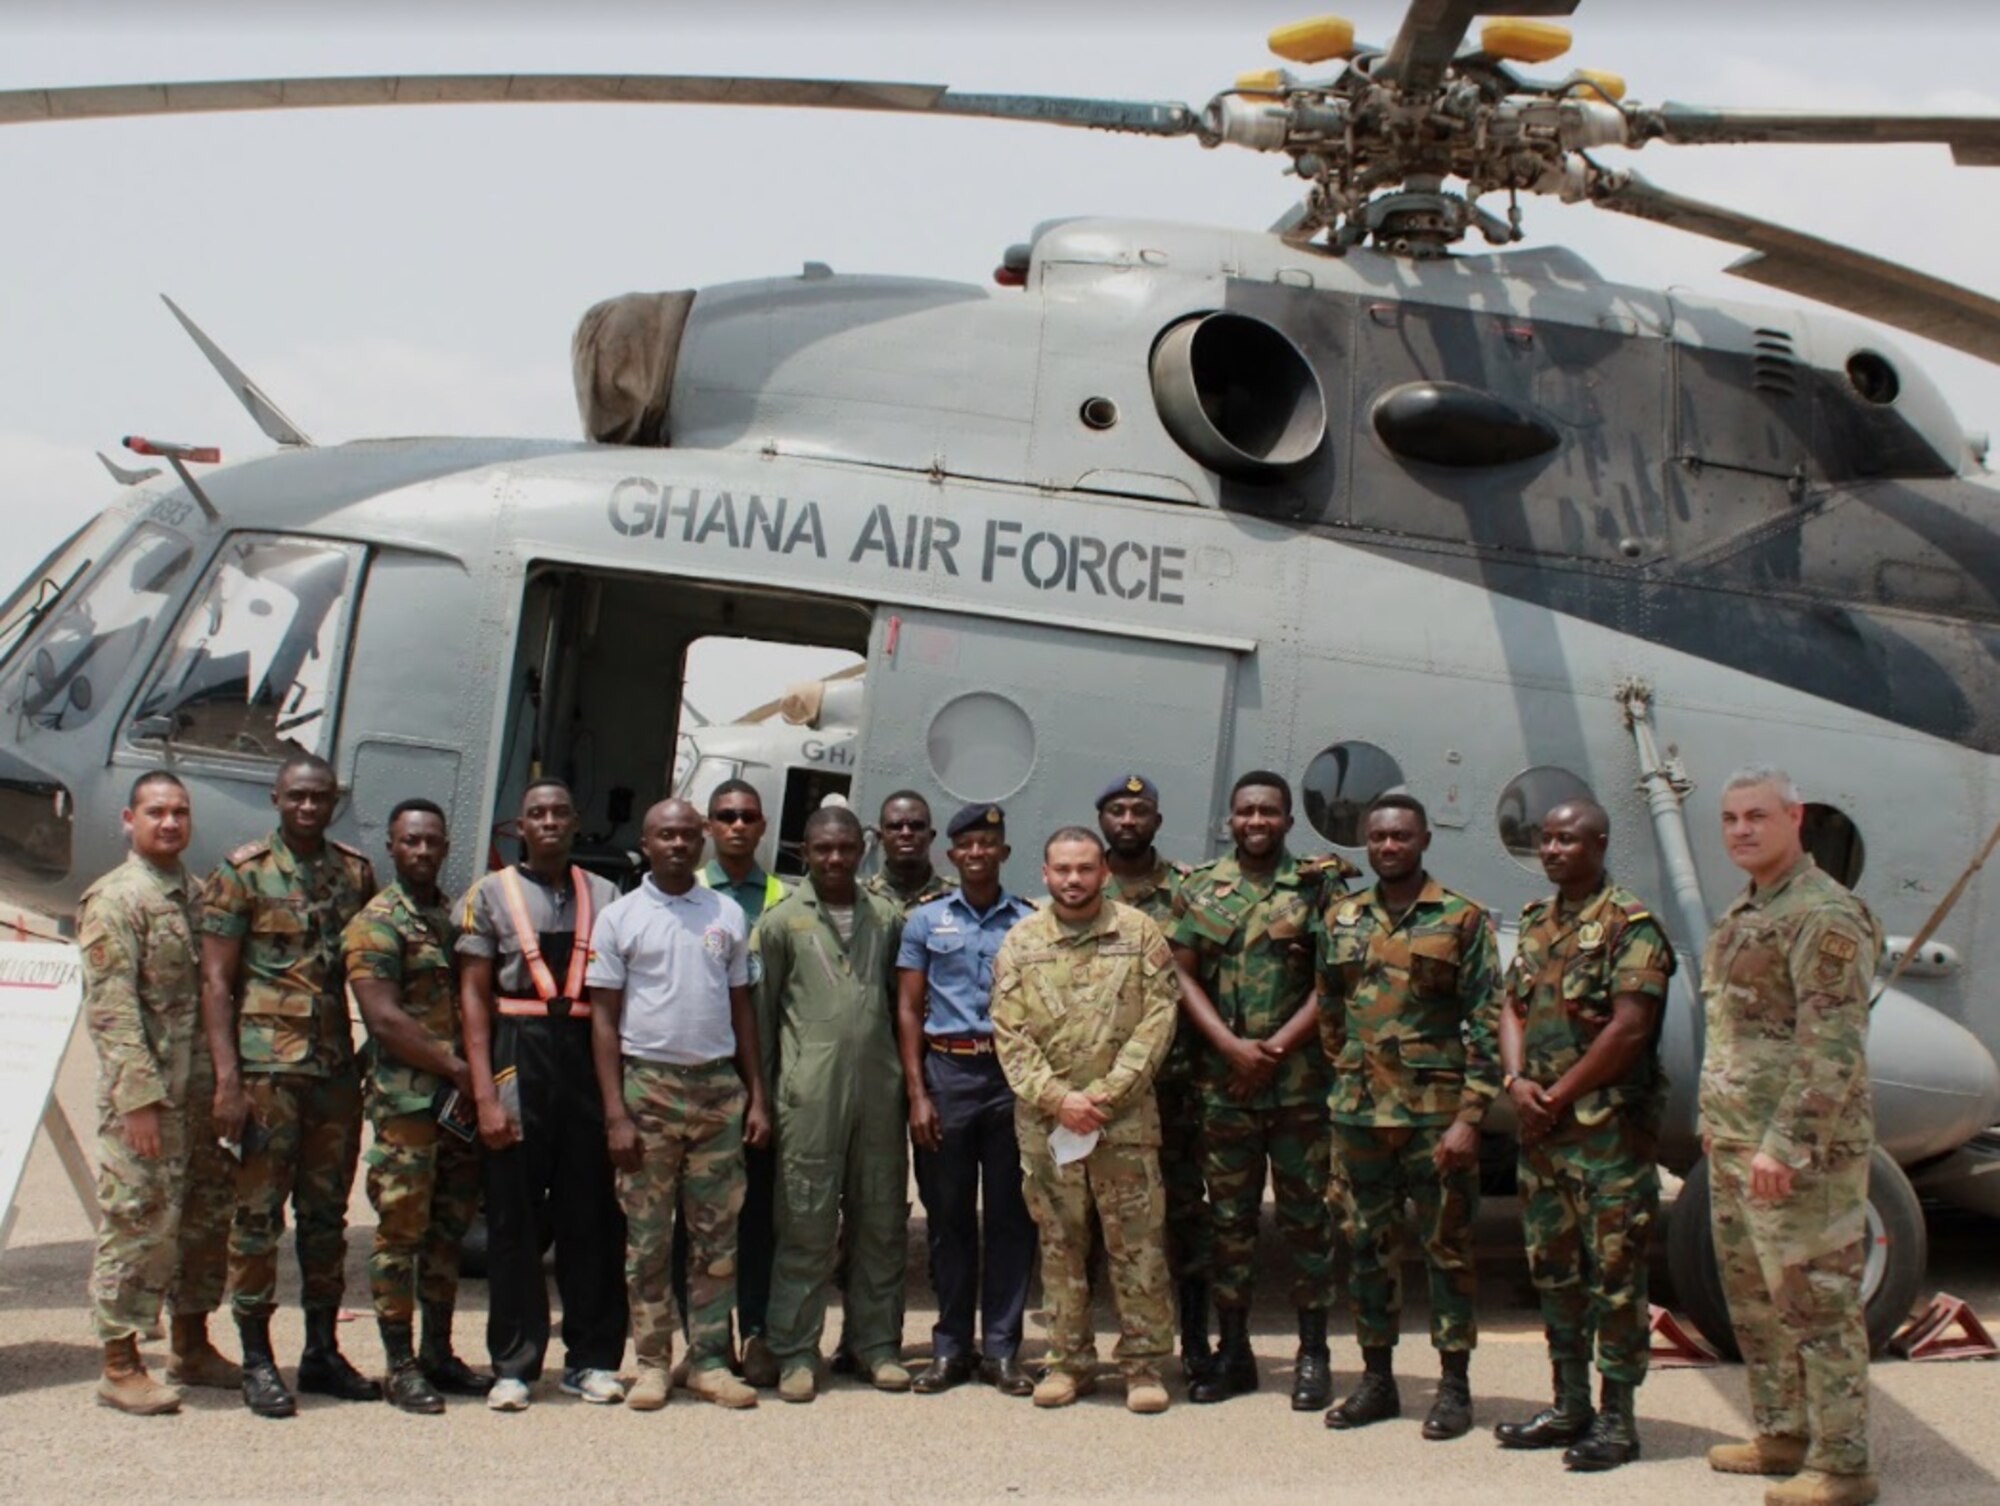 Air advisors assigned to the 818th Mobility Support Advisory Squadron and Ghanaian Armed Forces members pose for a photo in front of a Mil Mi-17 aircraft used for aeromedical evacuation training March 8, 2022, at Air Force Base, Accra, Ghana. Air advisors deployed to Ghana in support of the U.S. Africa Command’s African Peacekeeping Rapid Response Partnership Training program to prepare Ghanaian forces for an upcoming U.N. deployment. (Courtesy photo)